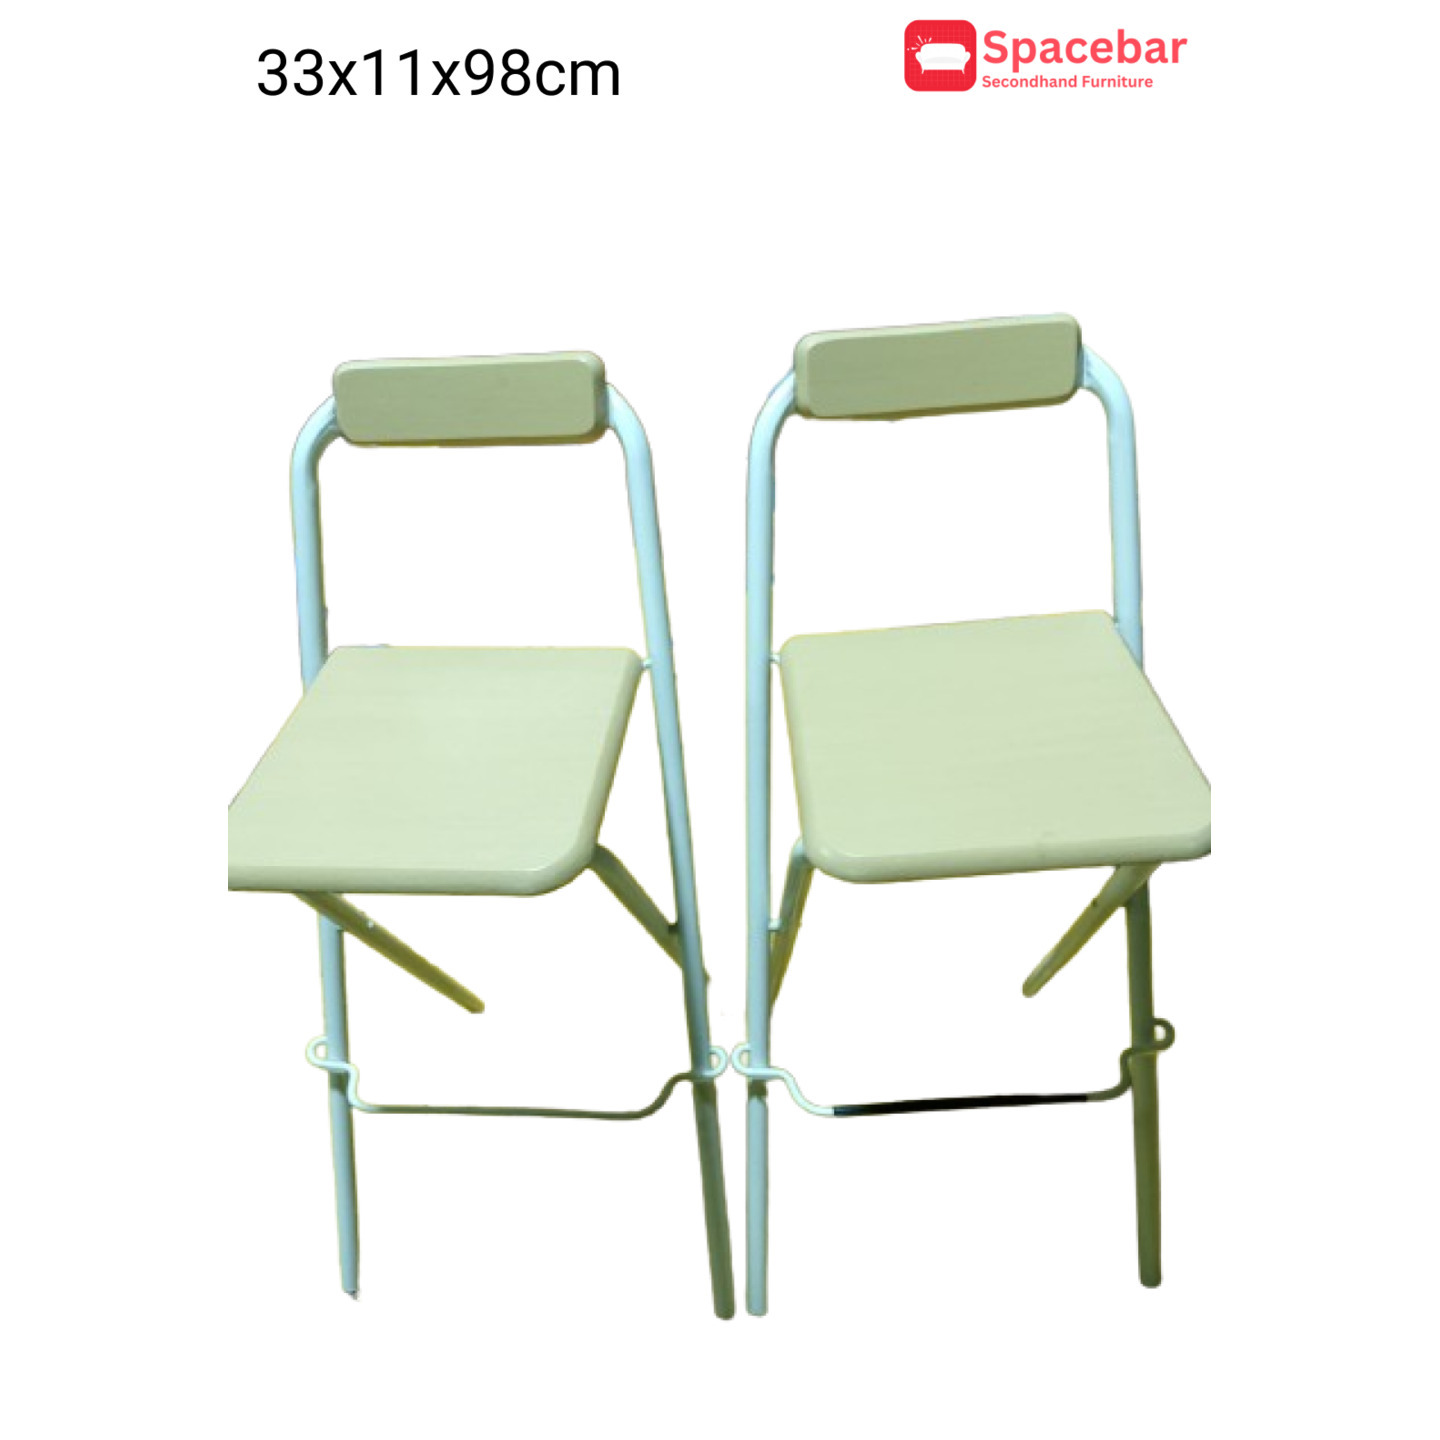 Outdoor High chairs